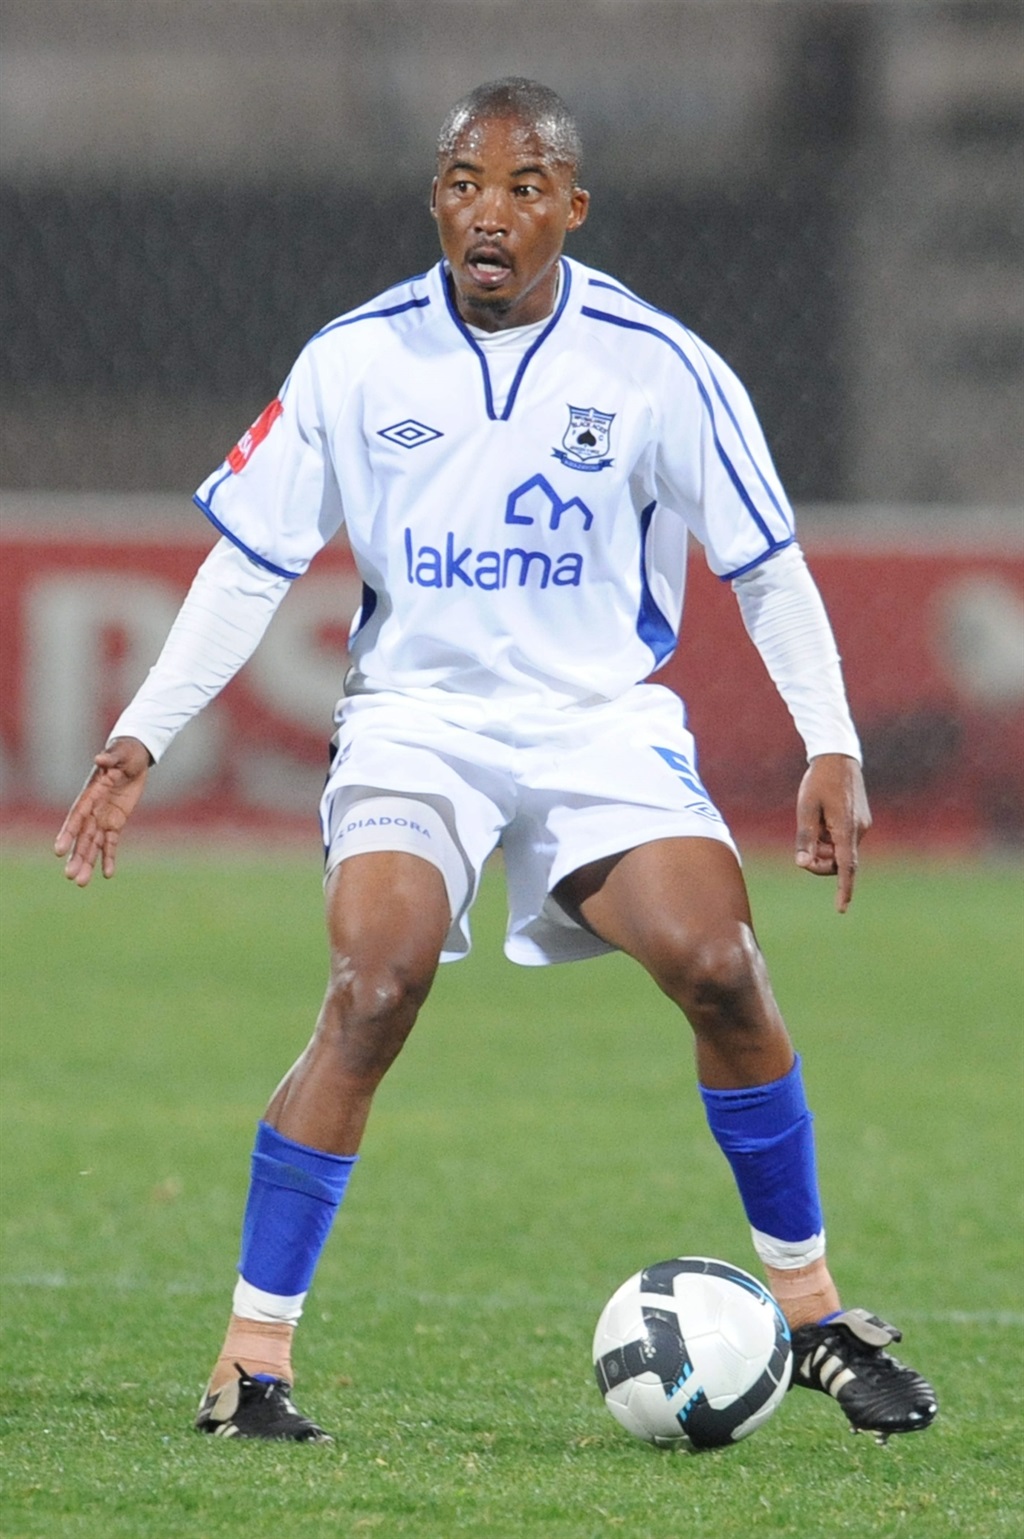 ATTERIDGEVILLE, SOUTH AFRICA - AUGUST 08, Lucas Tlhomelang during the Absa Premiership match between Sundowns and Black Aces from Super Stadium on August 8, 2009 in Atteridgeville, South Africa.